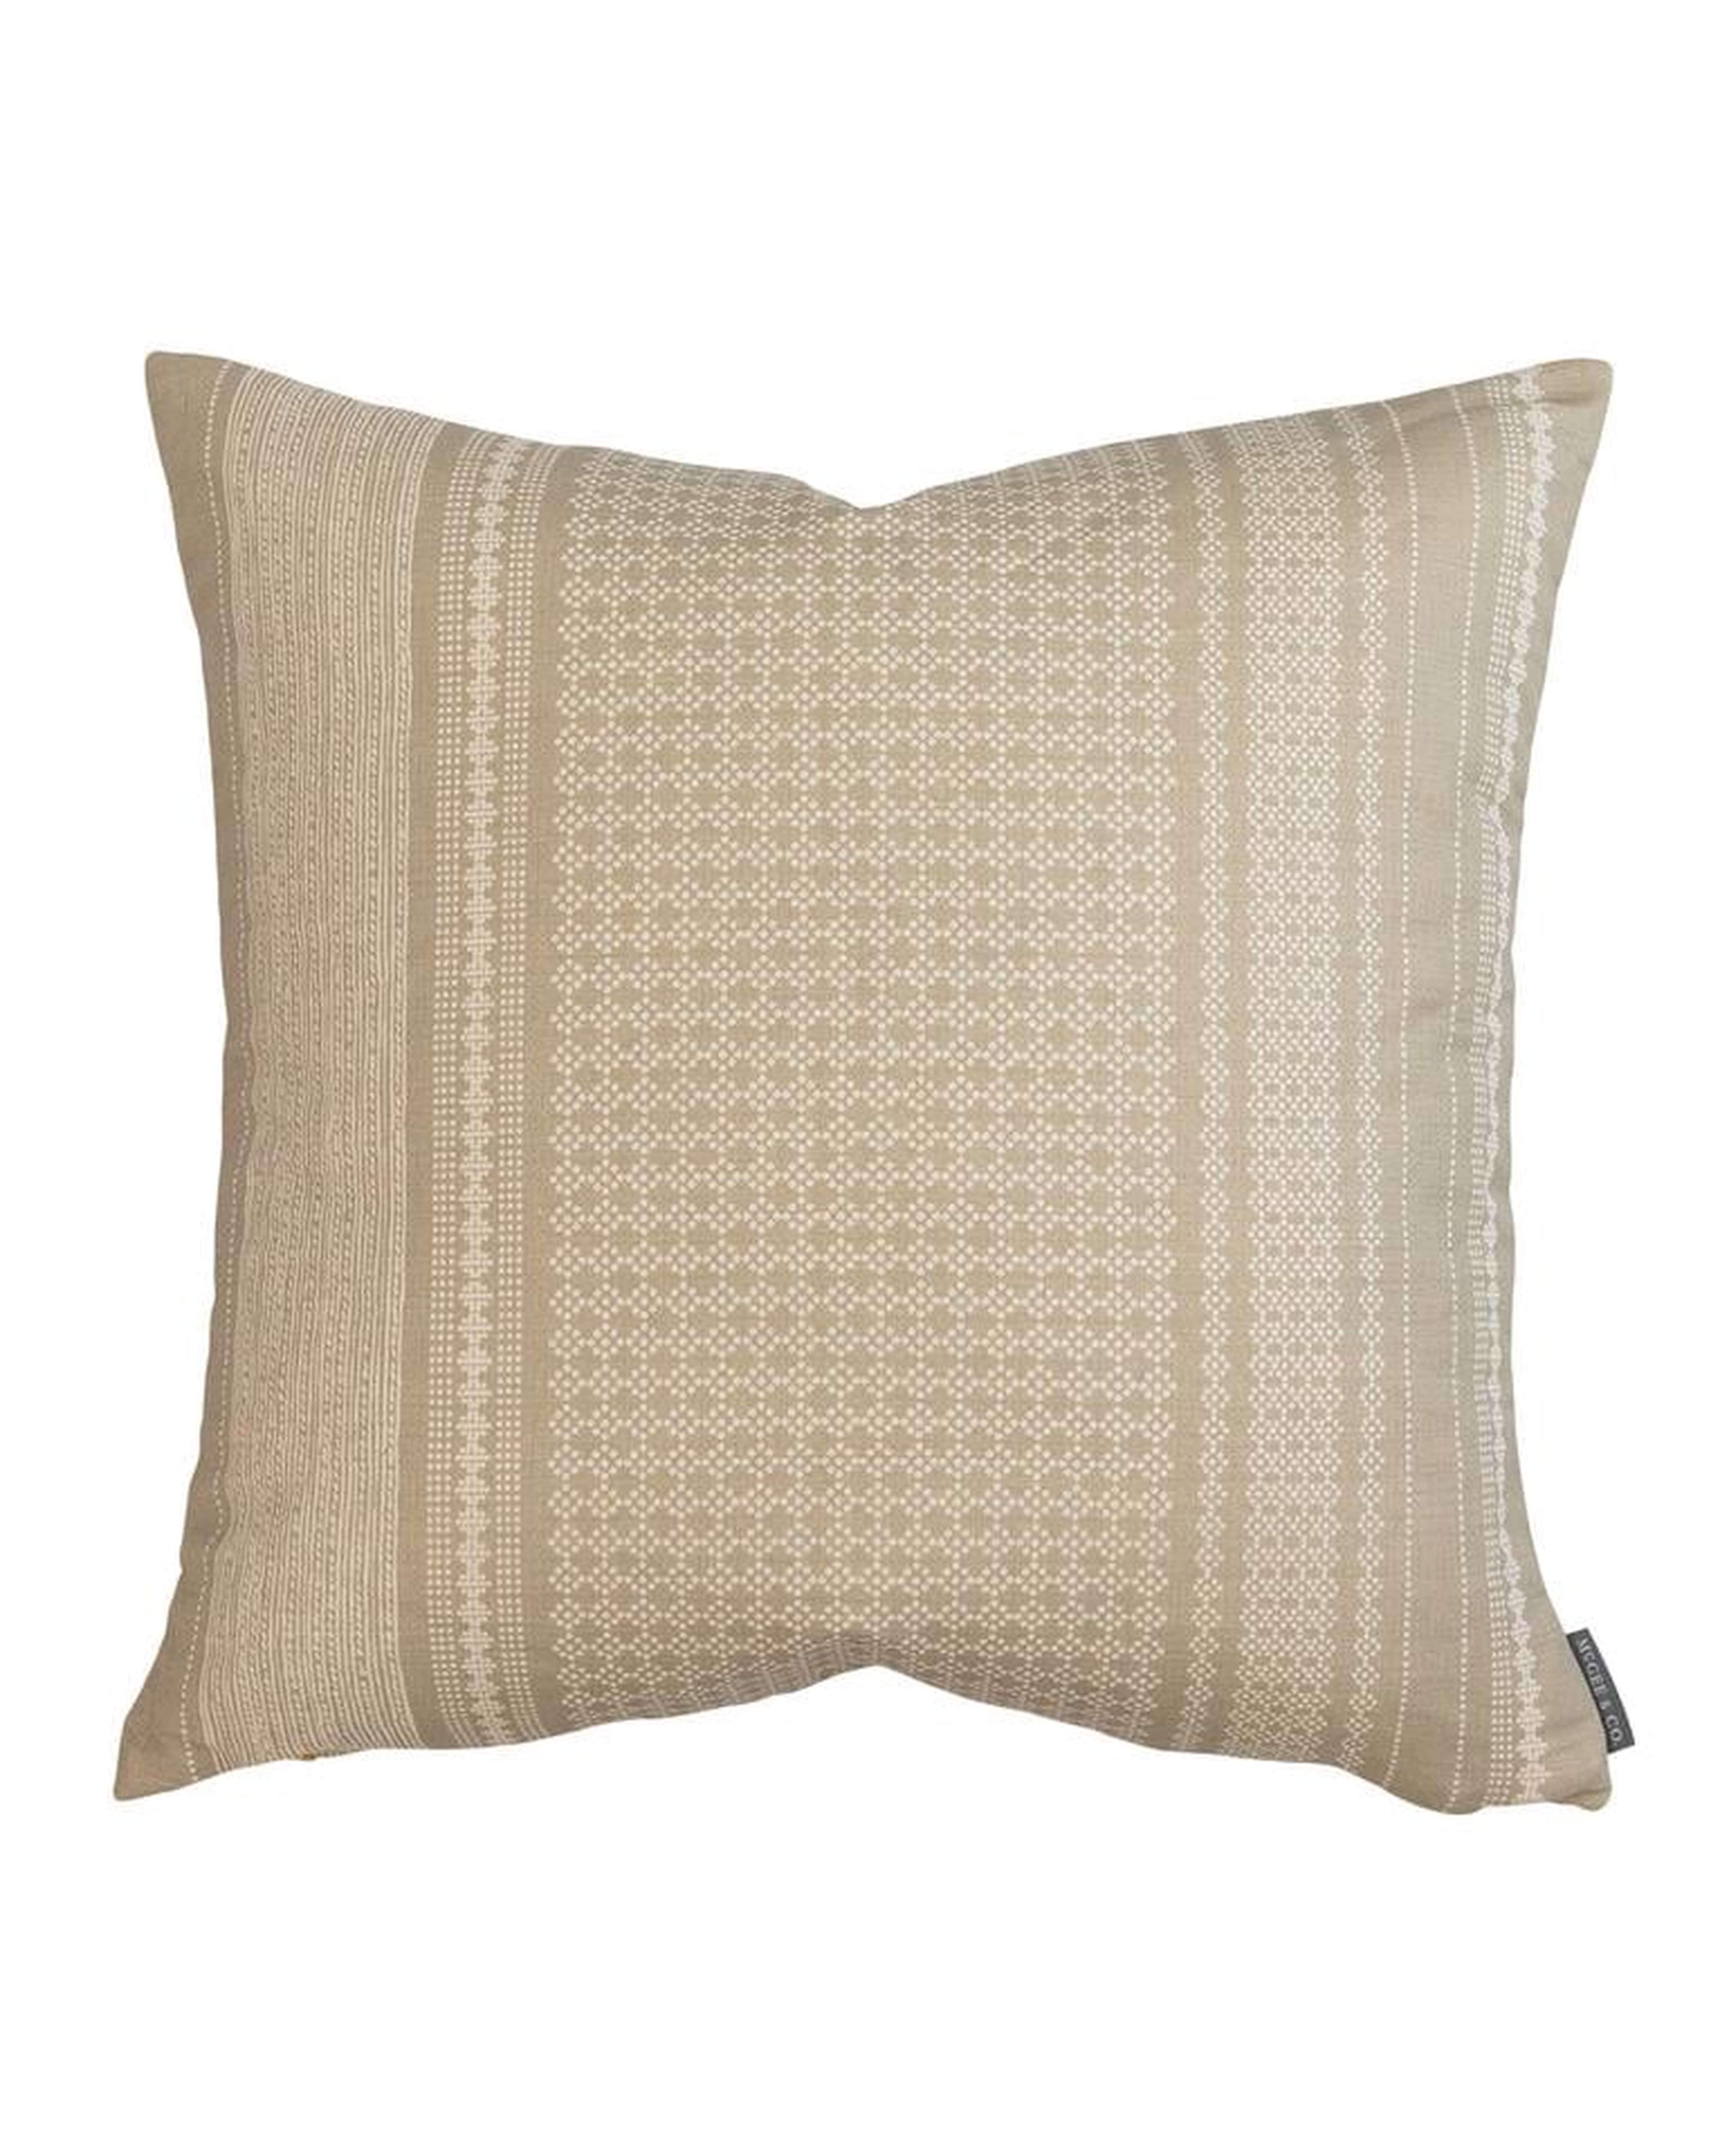 ELLEN DOTTED PRINT PILLOW COVER, 24" x 24" - McGee & Co.